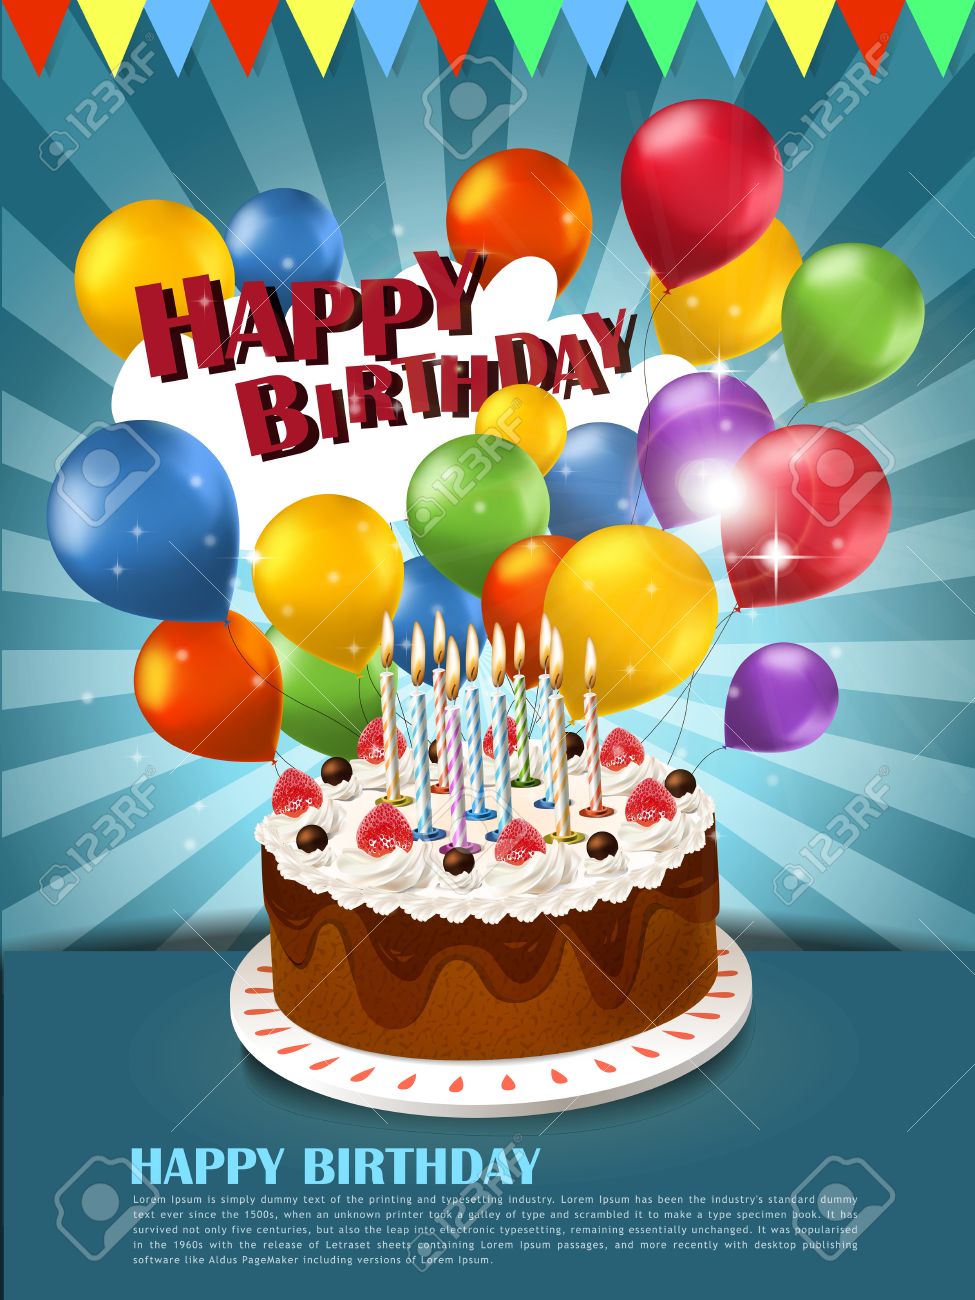 30288891-colorful-happy-birthday-celebration-poster-template-with-cake-balloons-elements.jpg